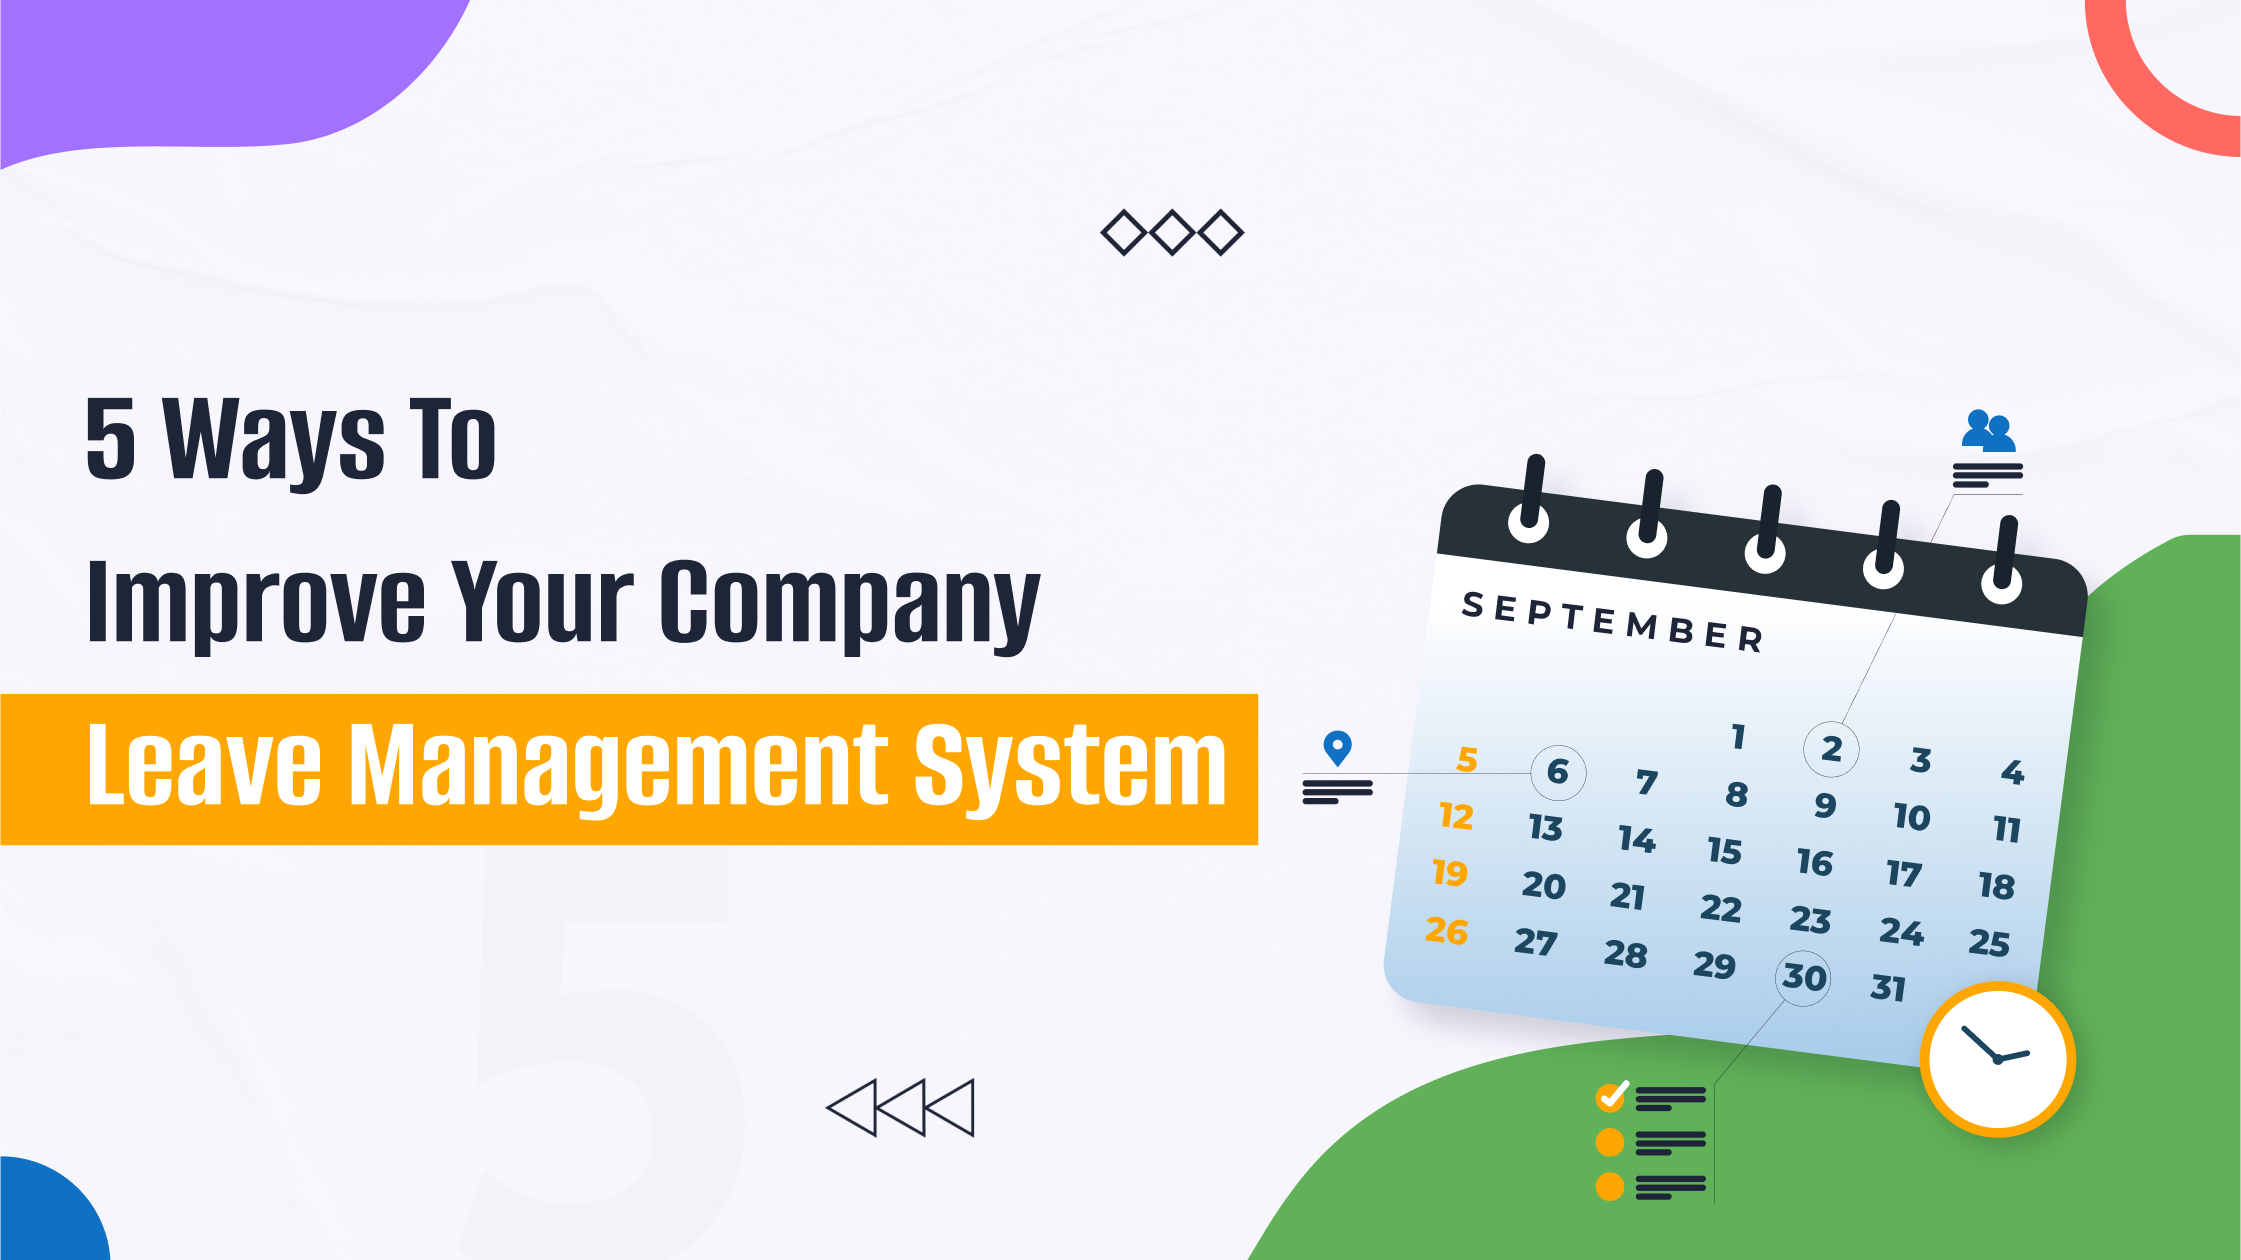 5 Ways To Improve Your Company Leave Management System